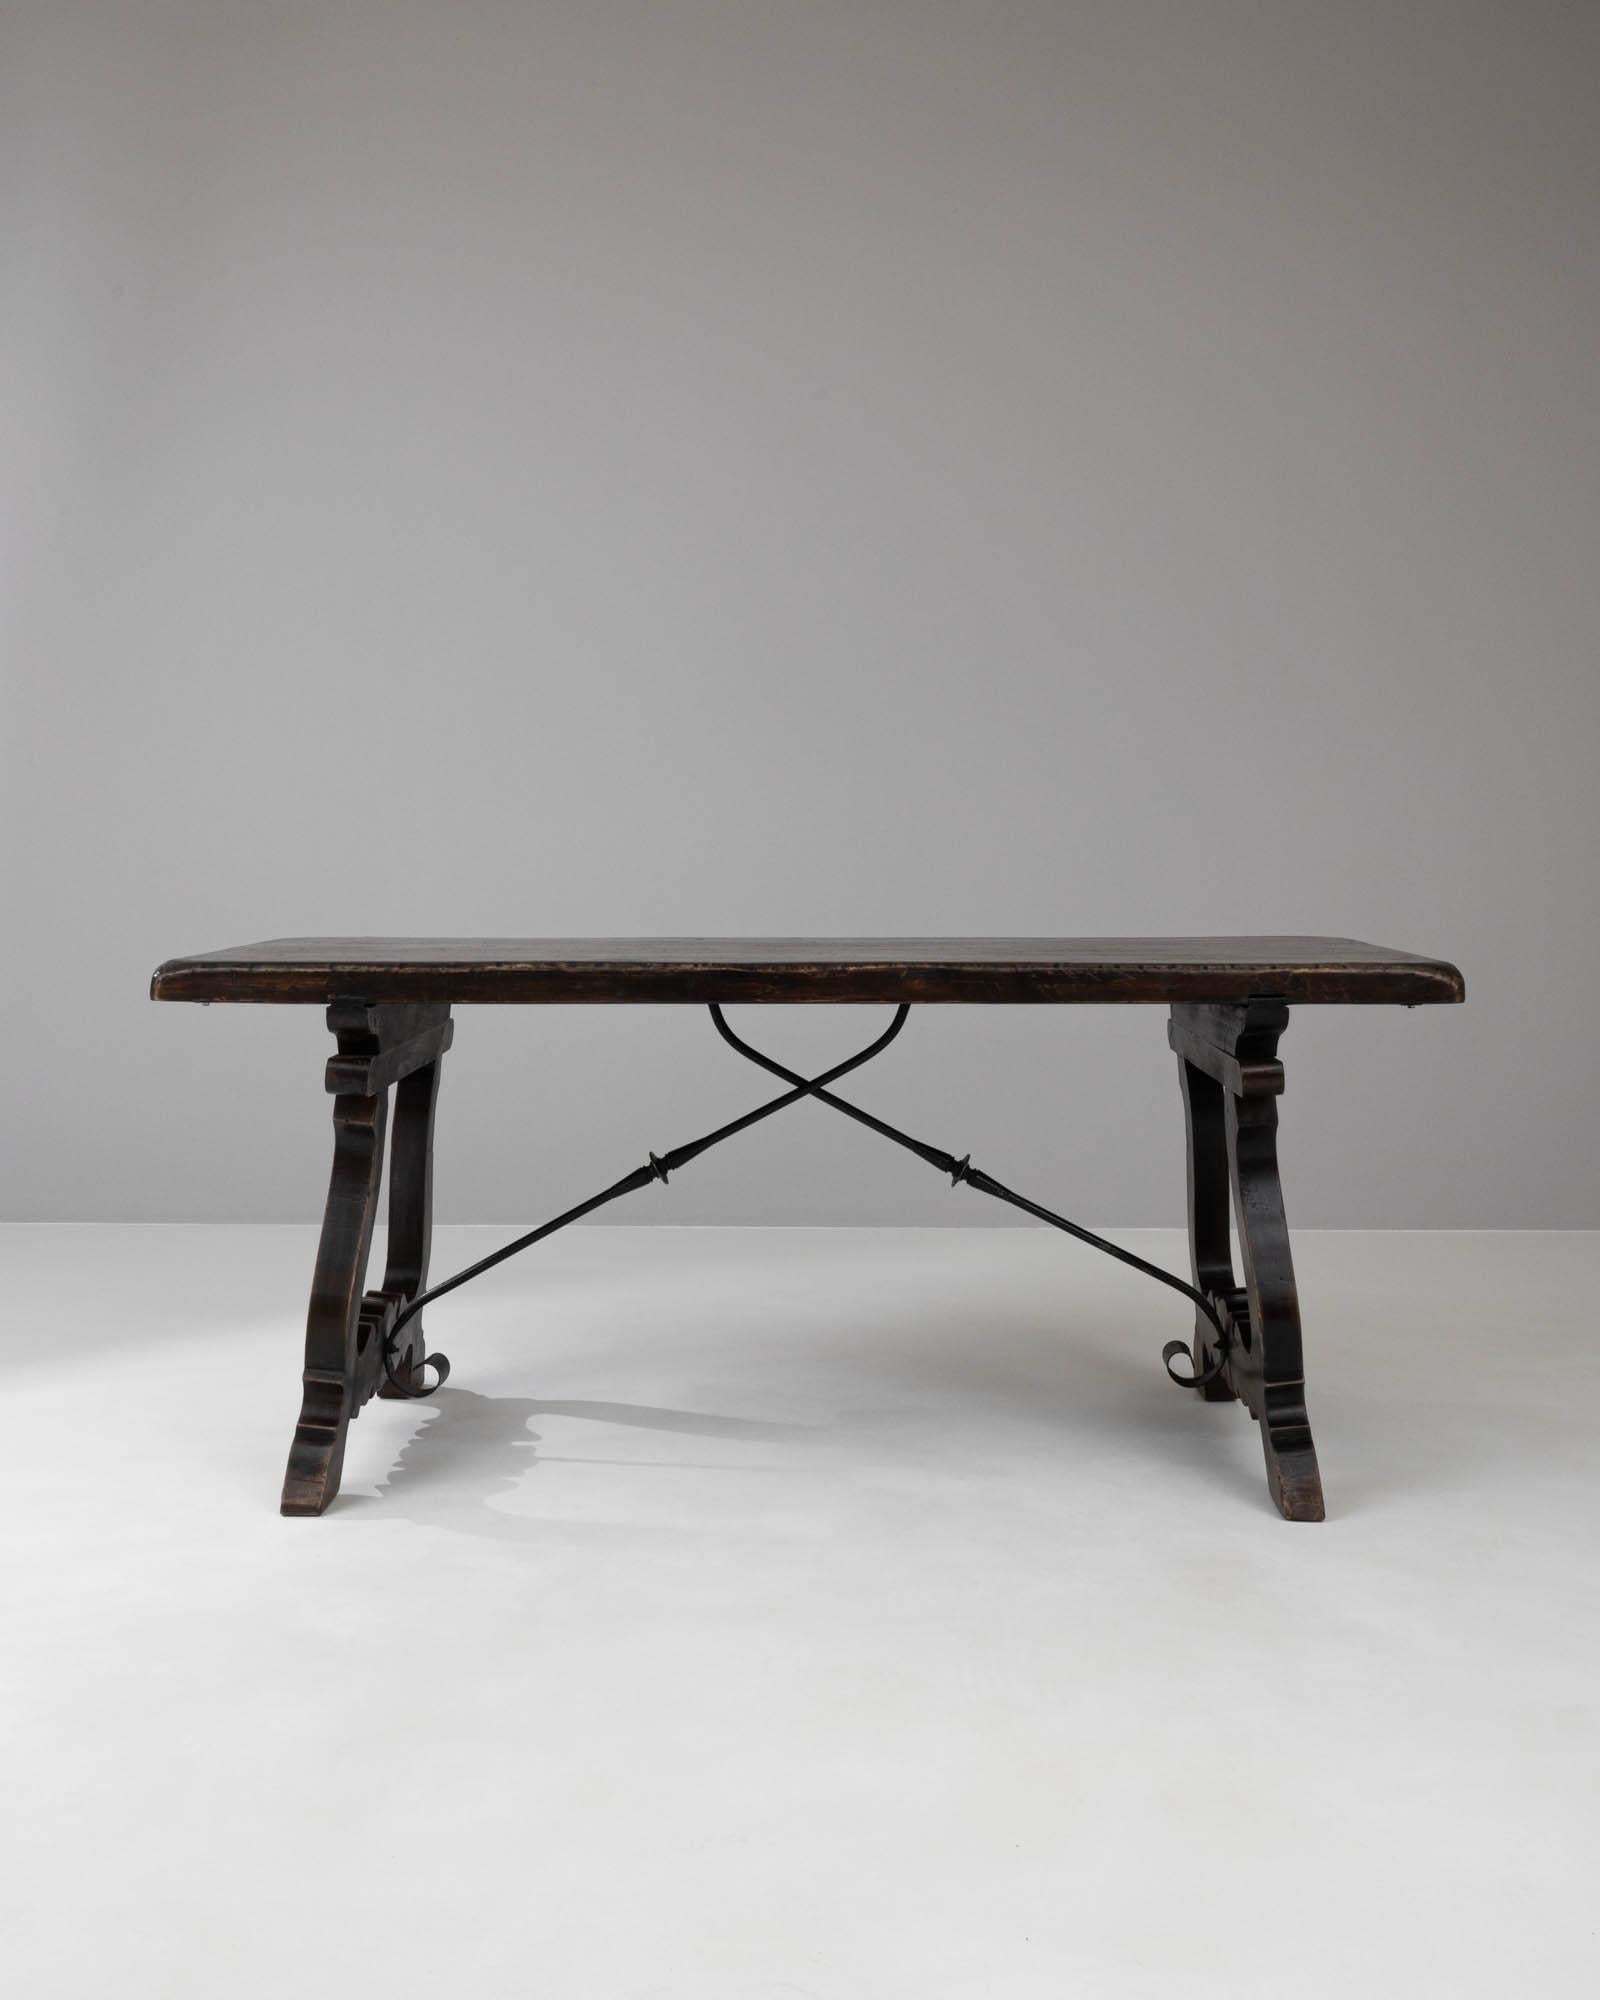 This 20th-century Spanish wooden dining table carries the warmth and rustic charm of a bygone era. Crafted with sturdy, dark wood, its robust legs showcase elegant curves and ornate carvings that hark back to the detailed workmanship of traditional